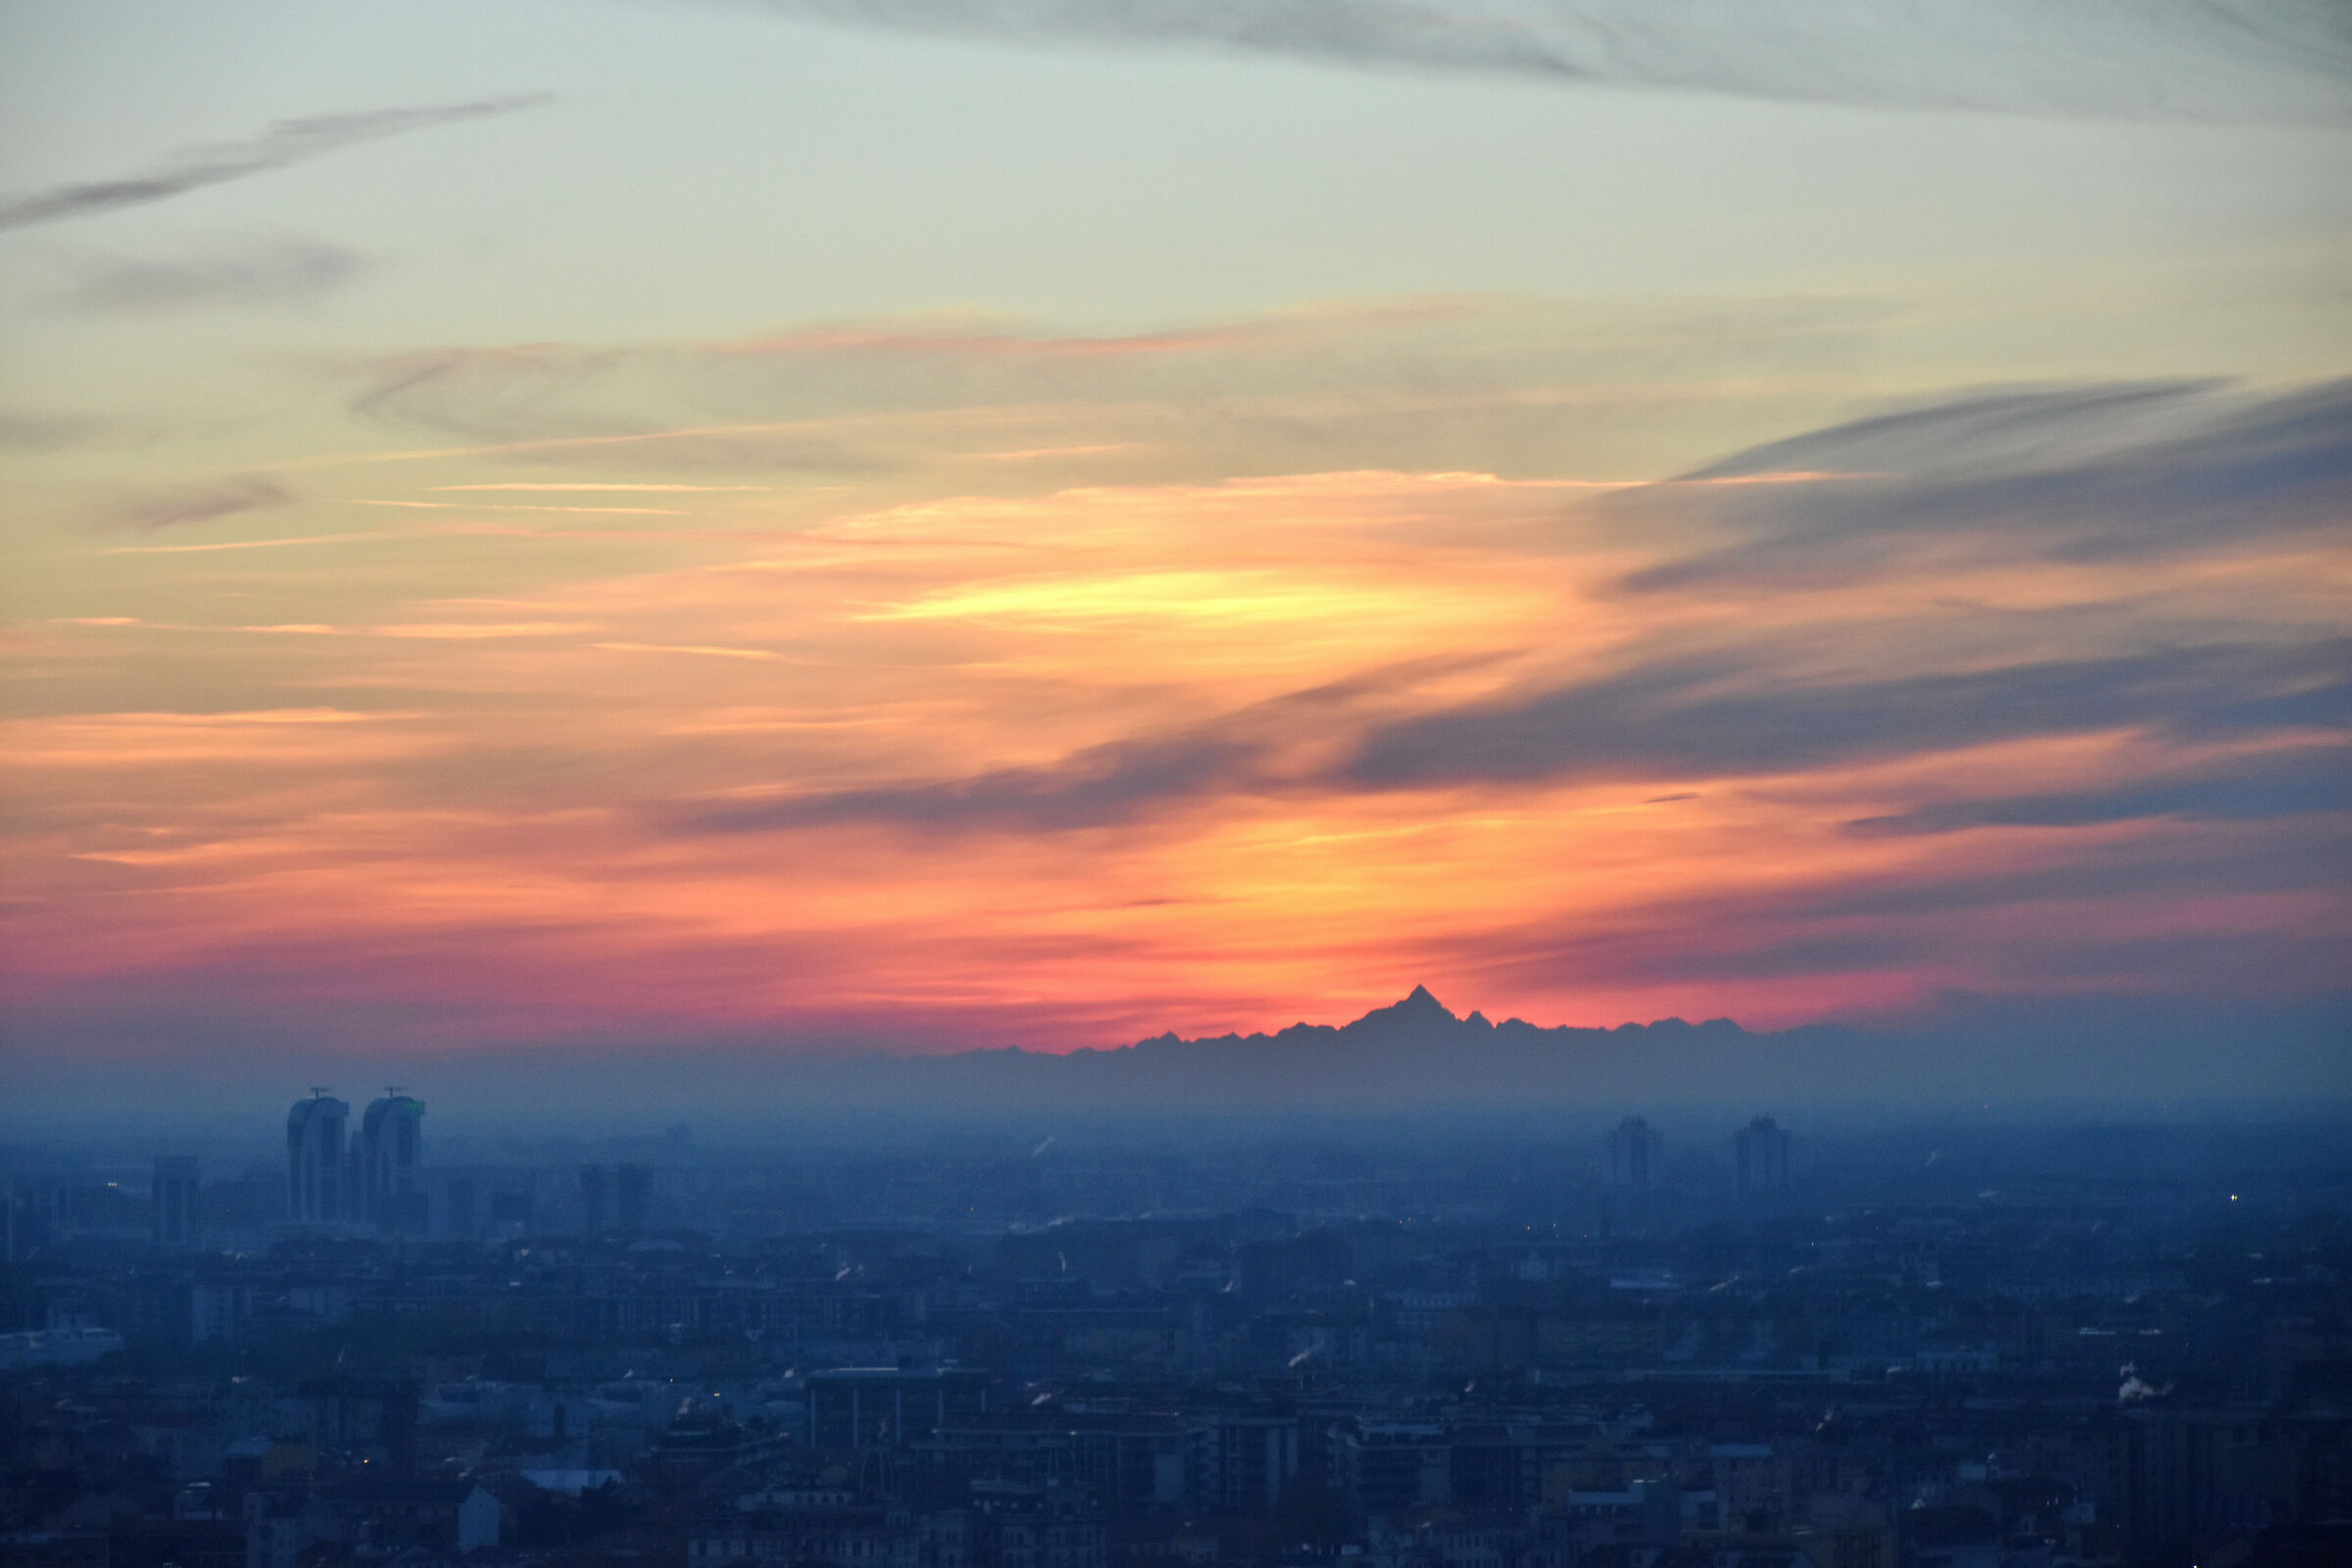 From Milan to Monviso at sunset...